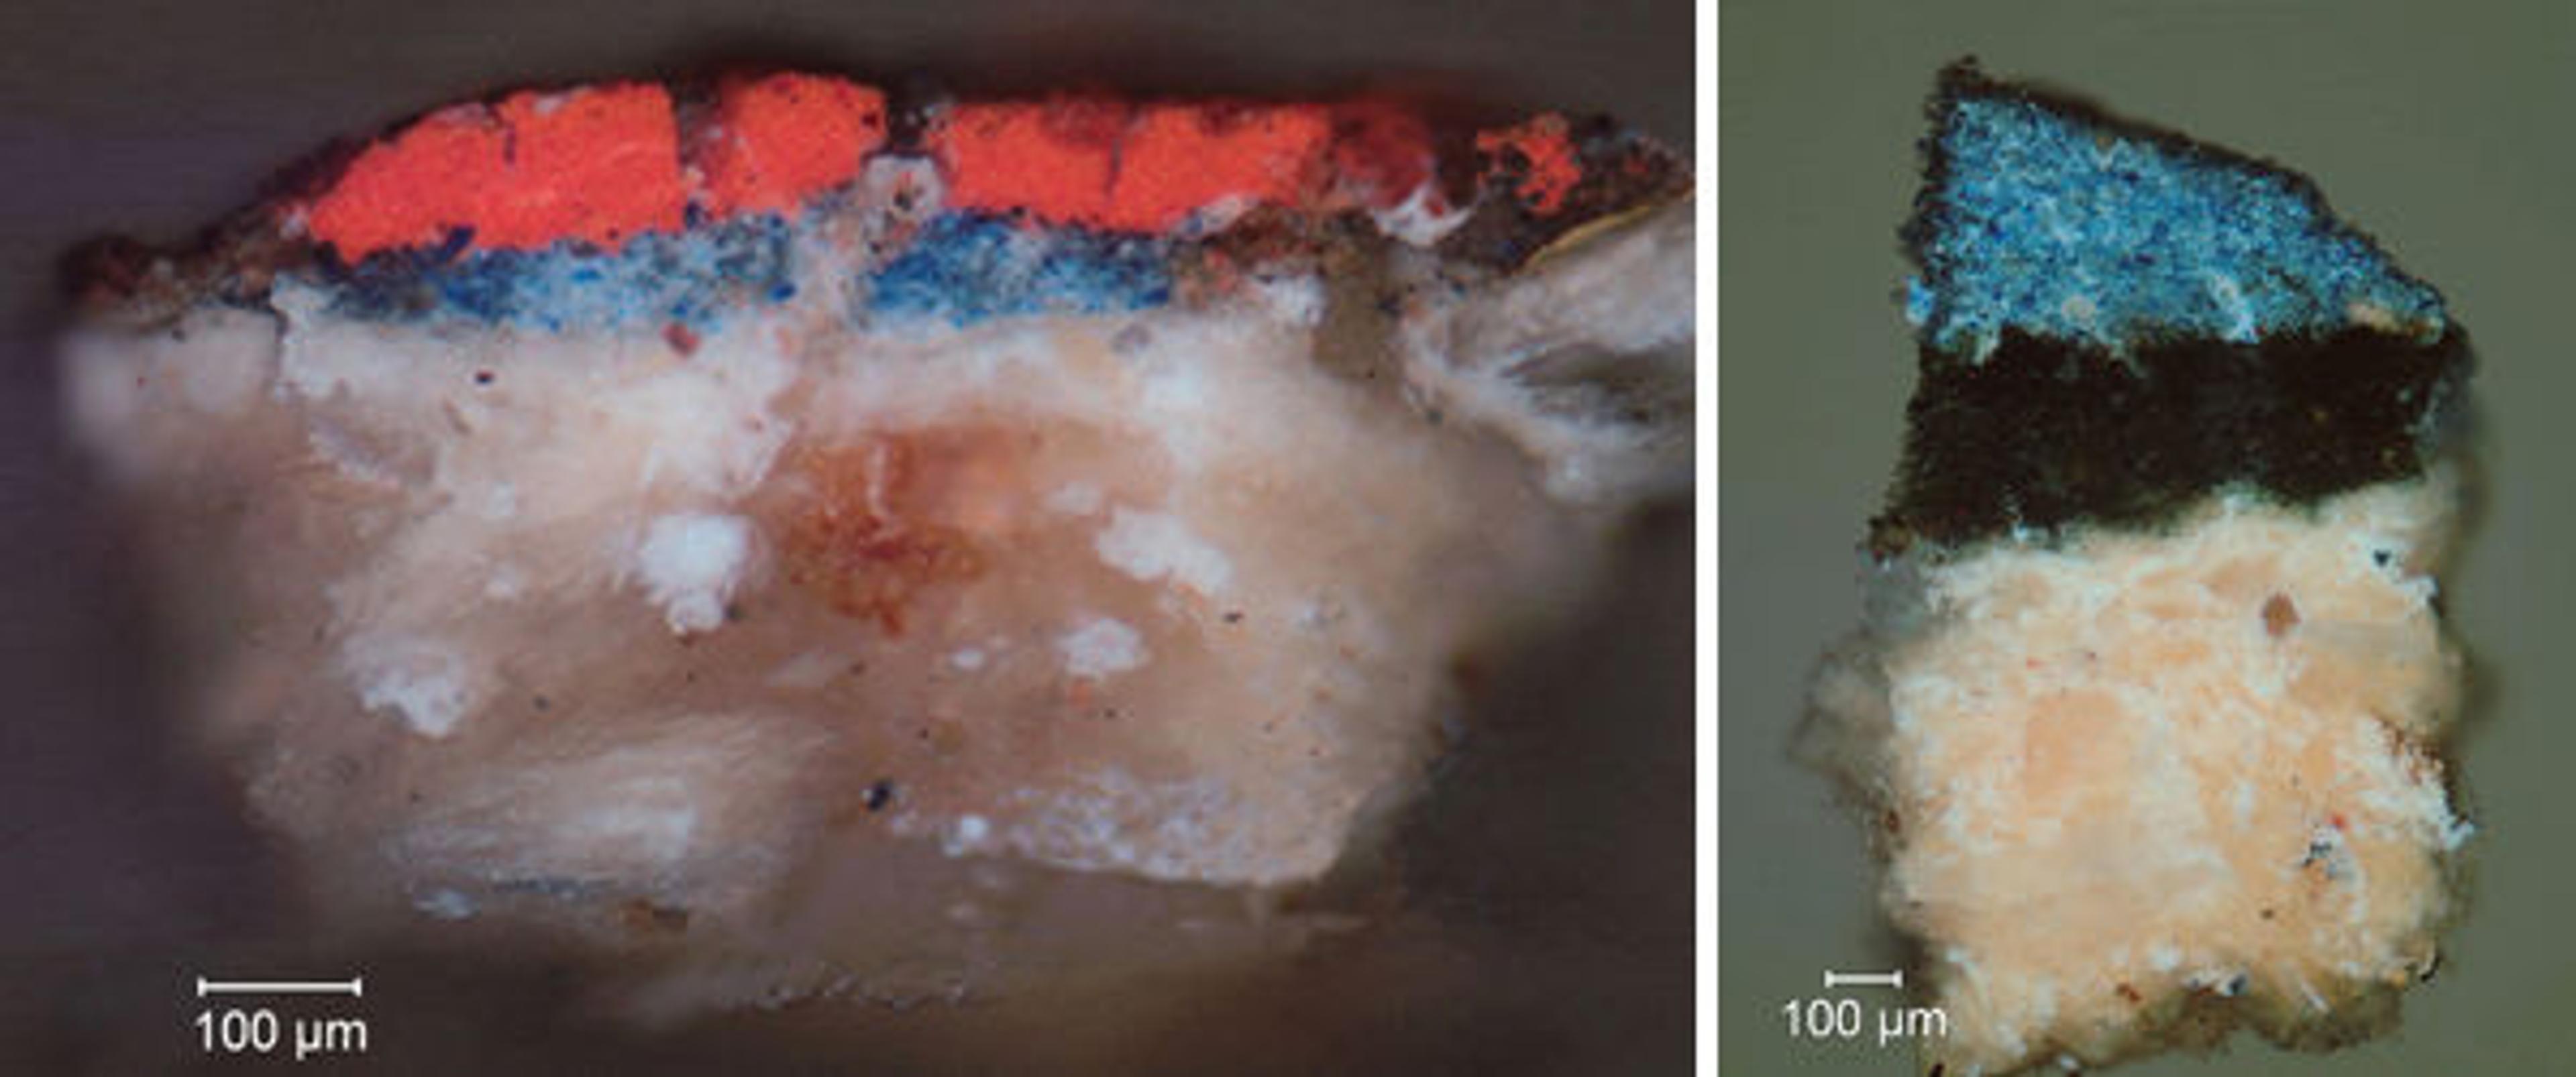 Left: Fig. 8. Cross section showing the sequence of application: whitish ground, gold leaf (present on right side), blue paint, and red paint. Right: Fig. 9. Cross section of a sample taken from the crevice in the carved ornament, showing the sequence of application: whitish ground, dark blue indigo underpaint, and bright blue ultramarine paint